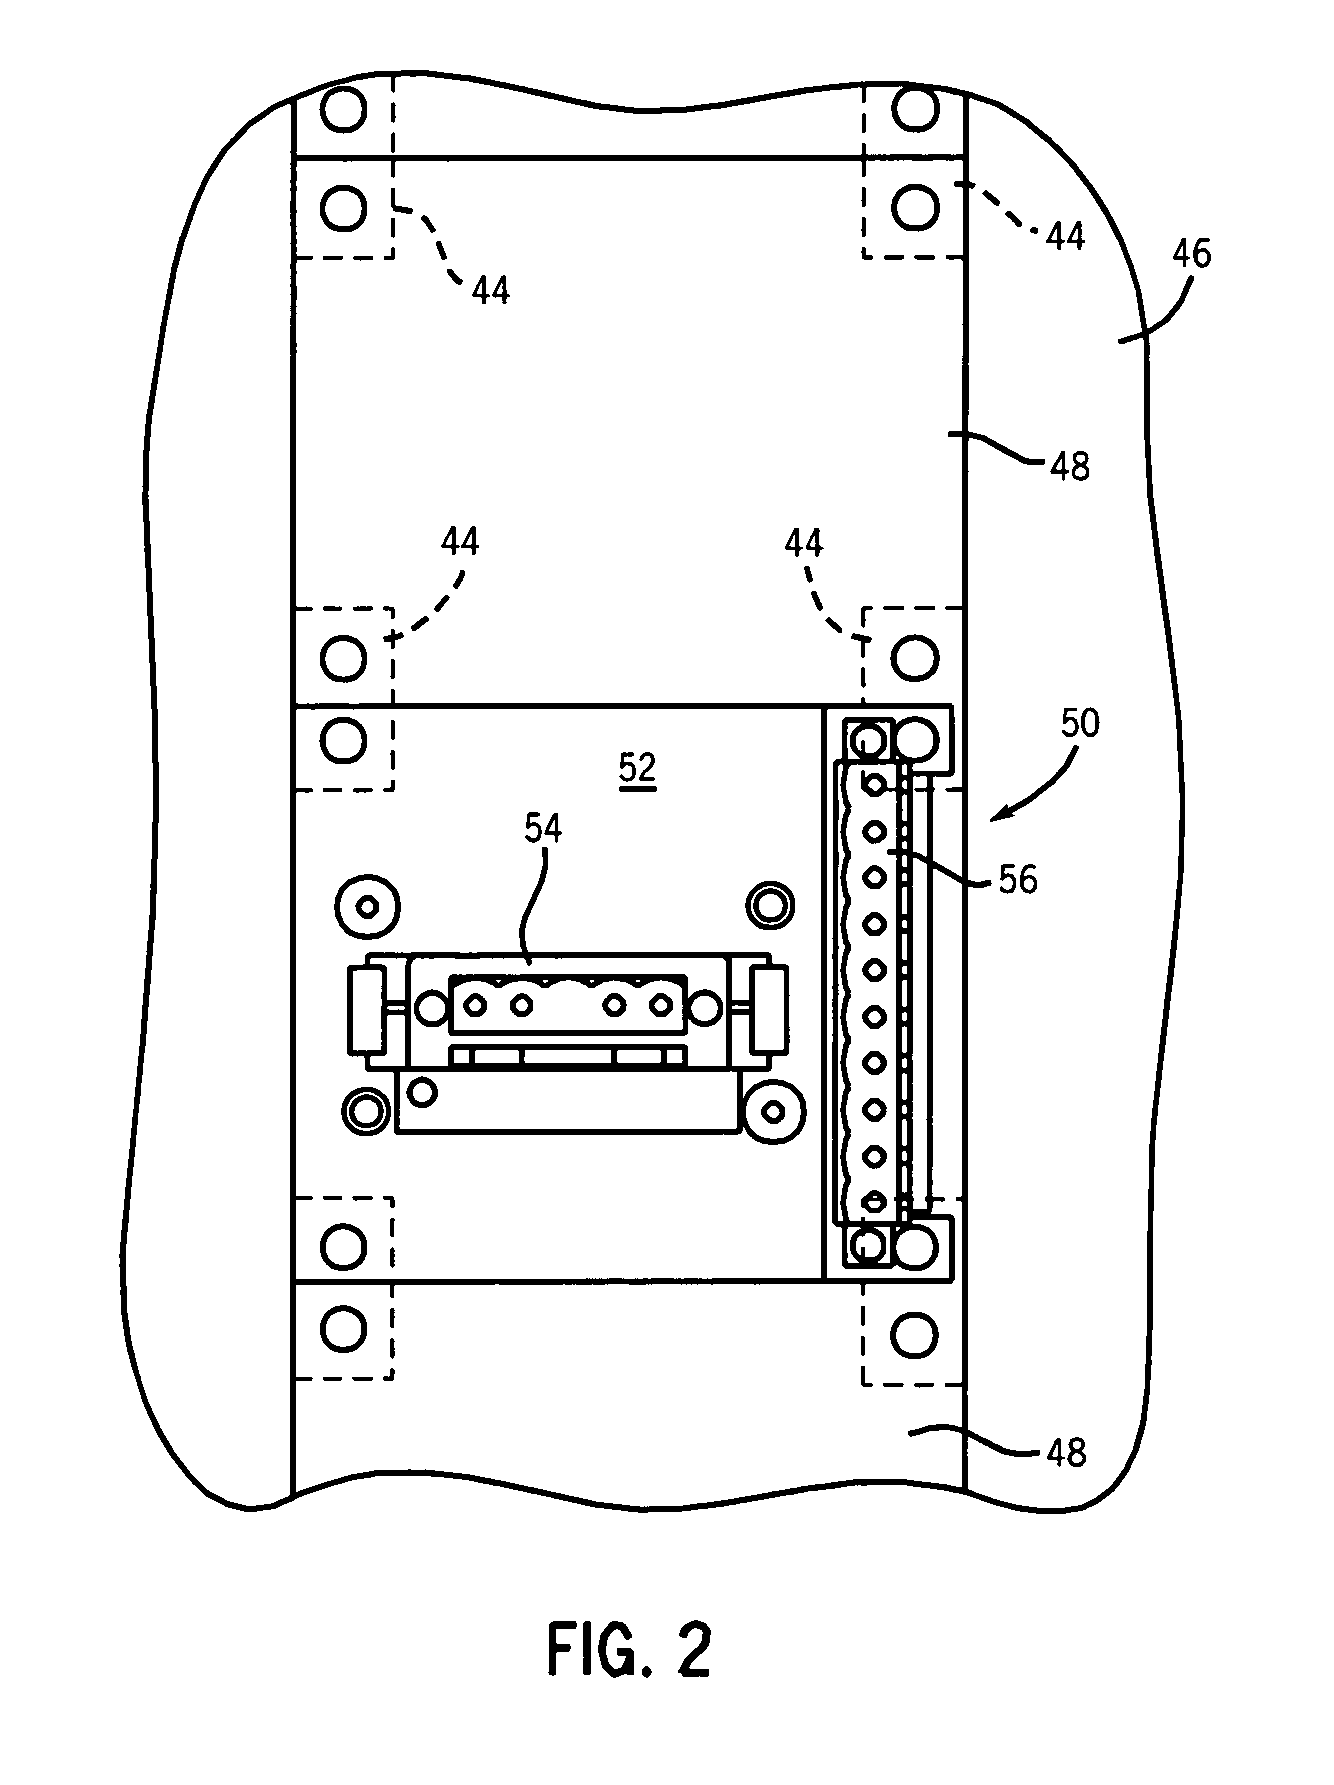 Electrical system having withdrawable unit with maintained control and communication connection